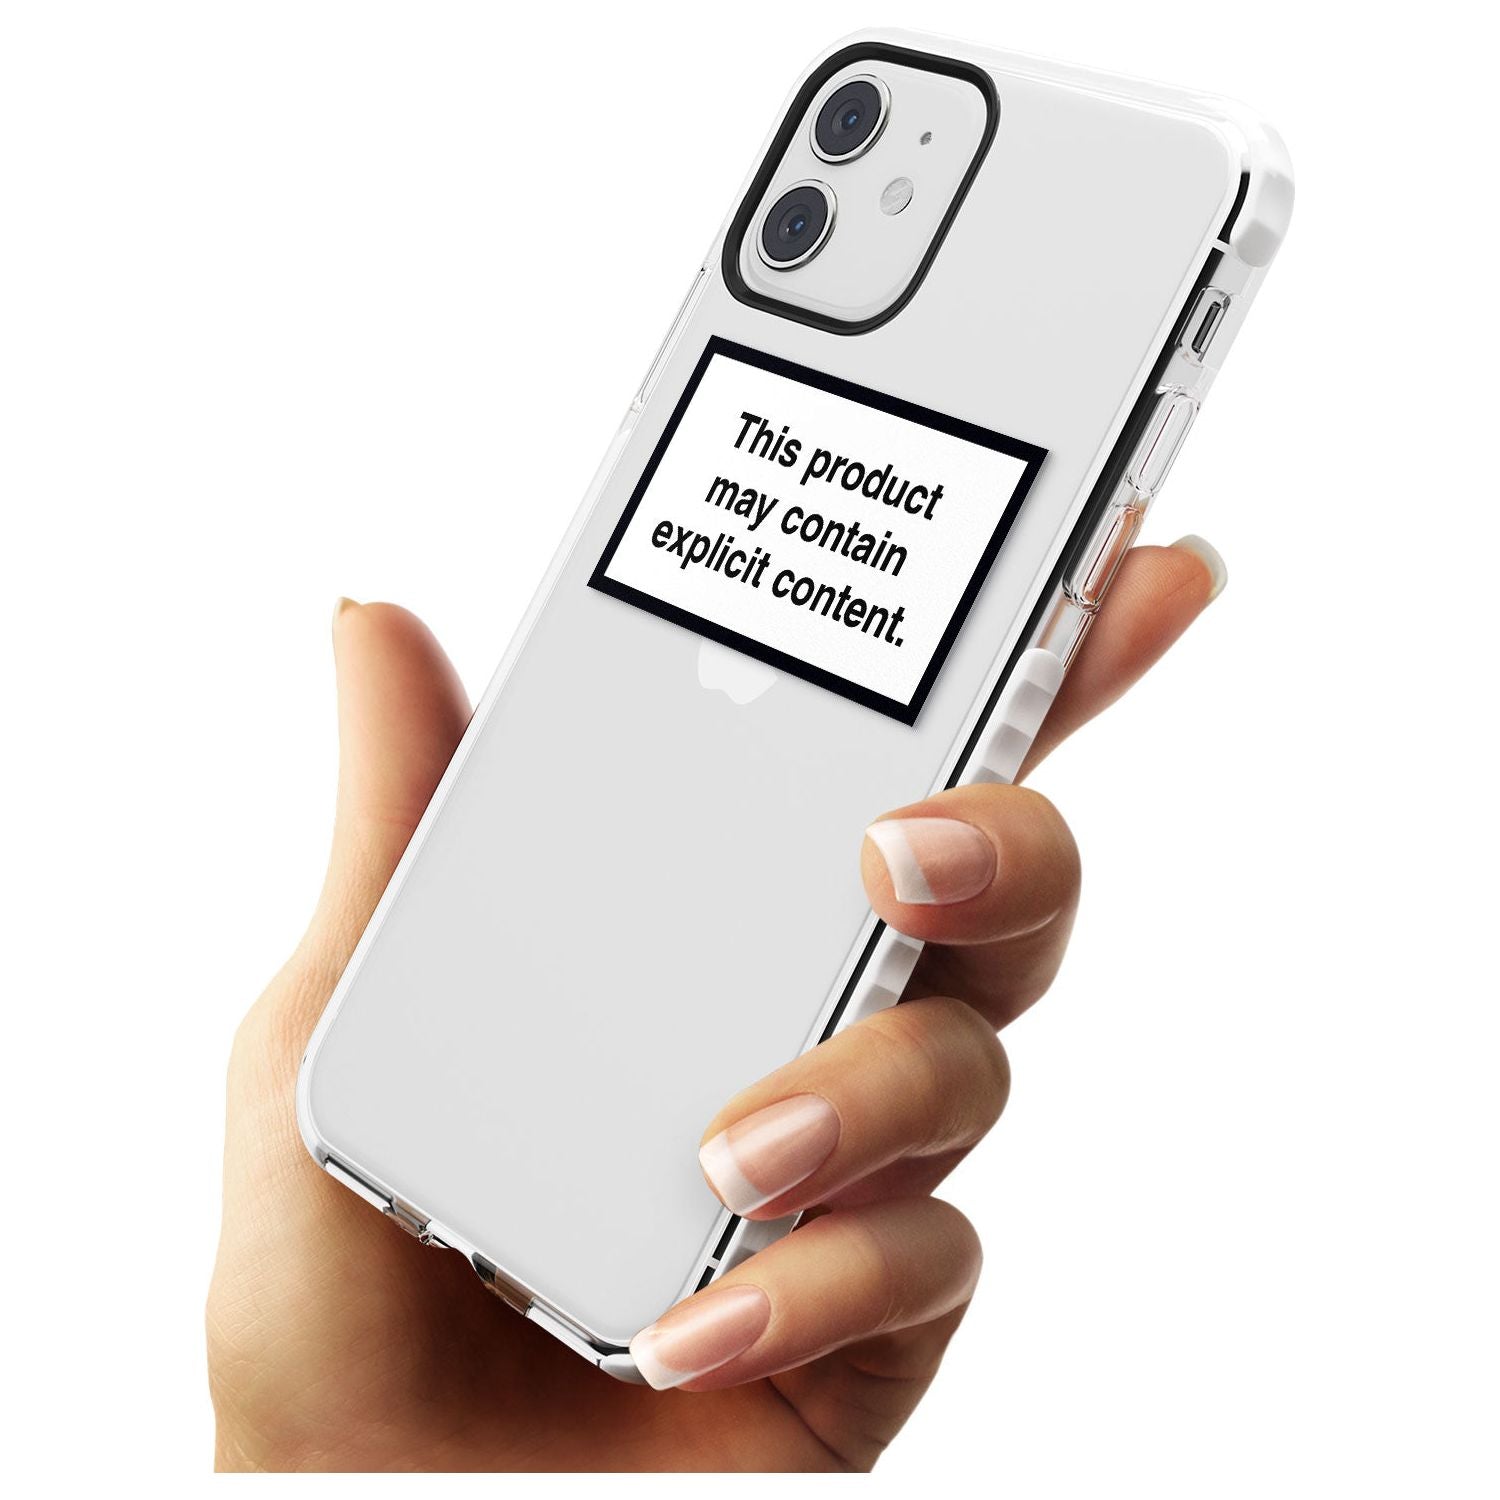 This product may contain explicit content Slim TPU Phone Case for iPhone 11